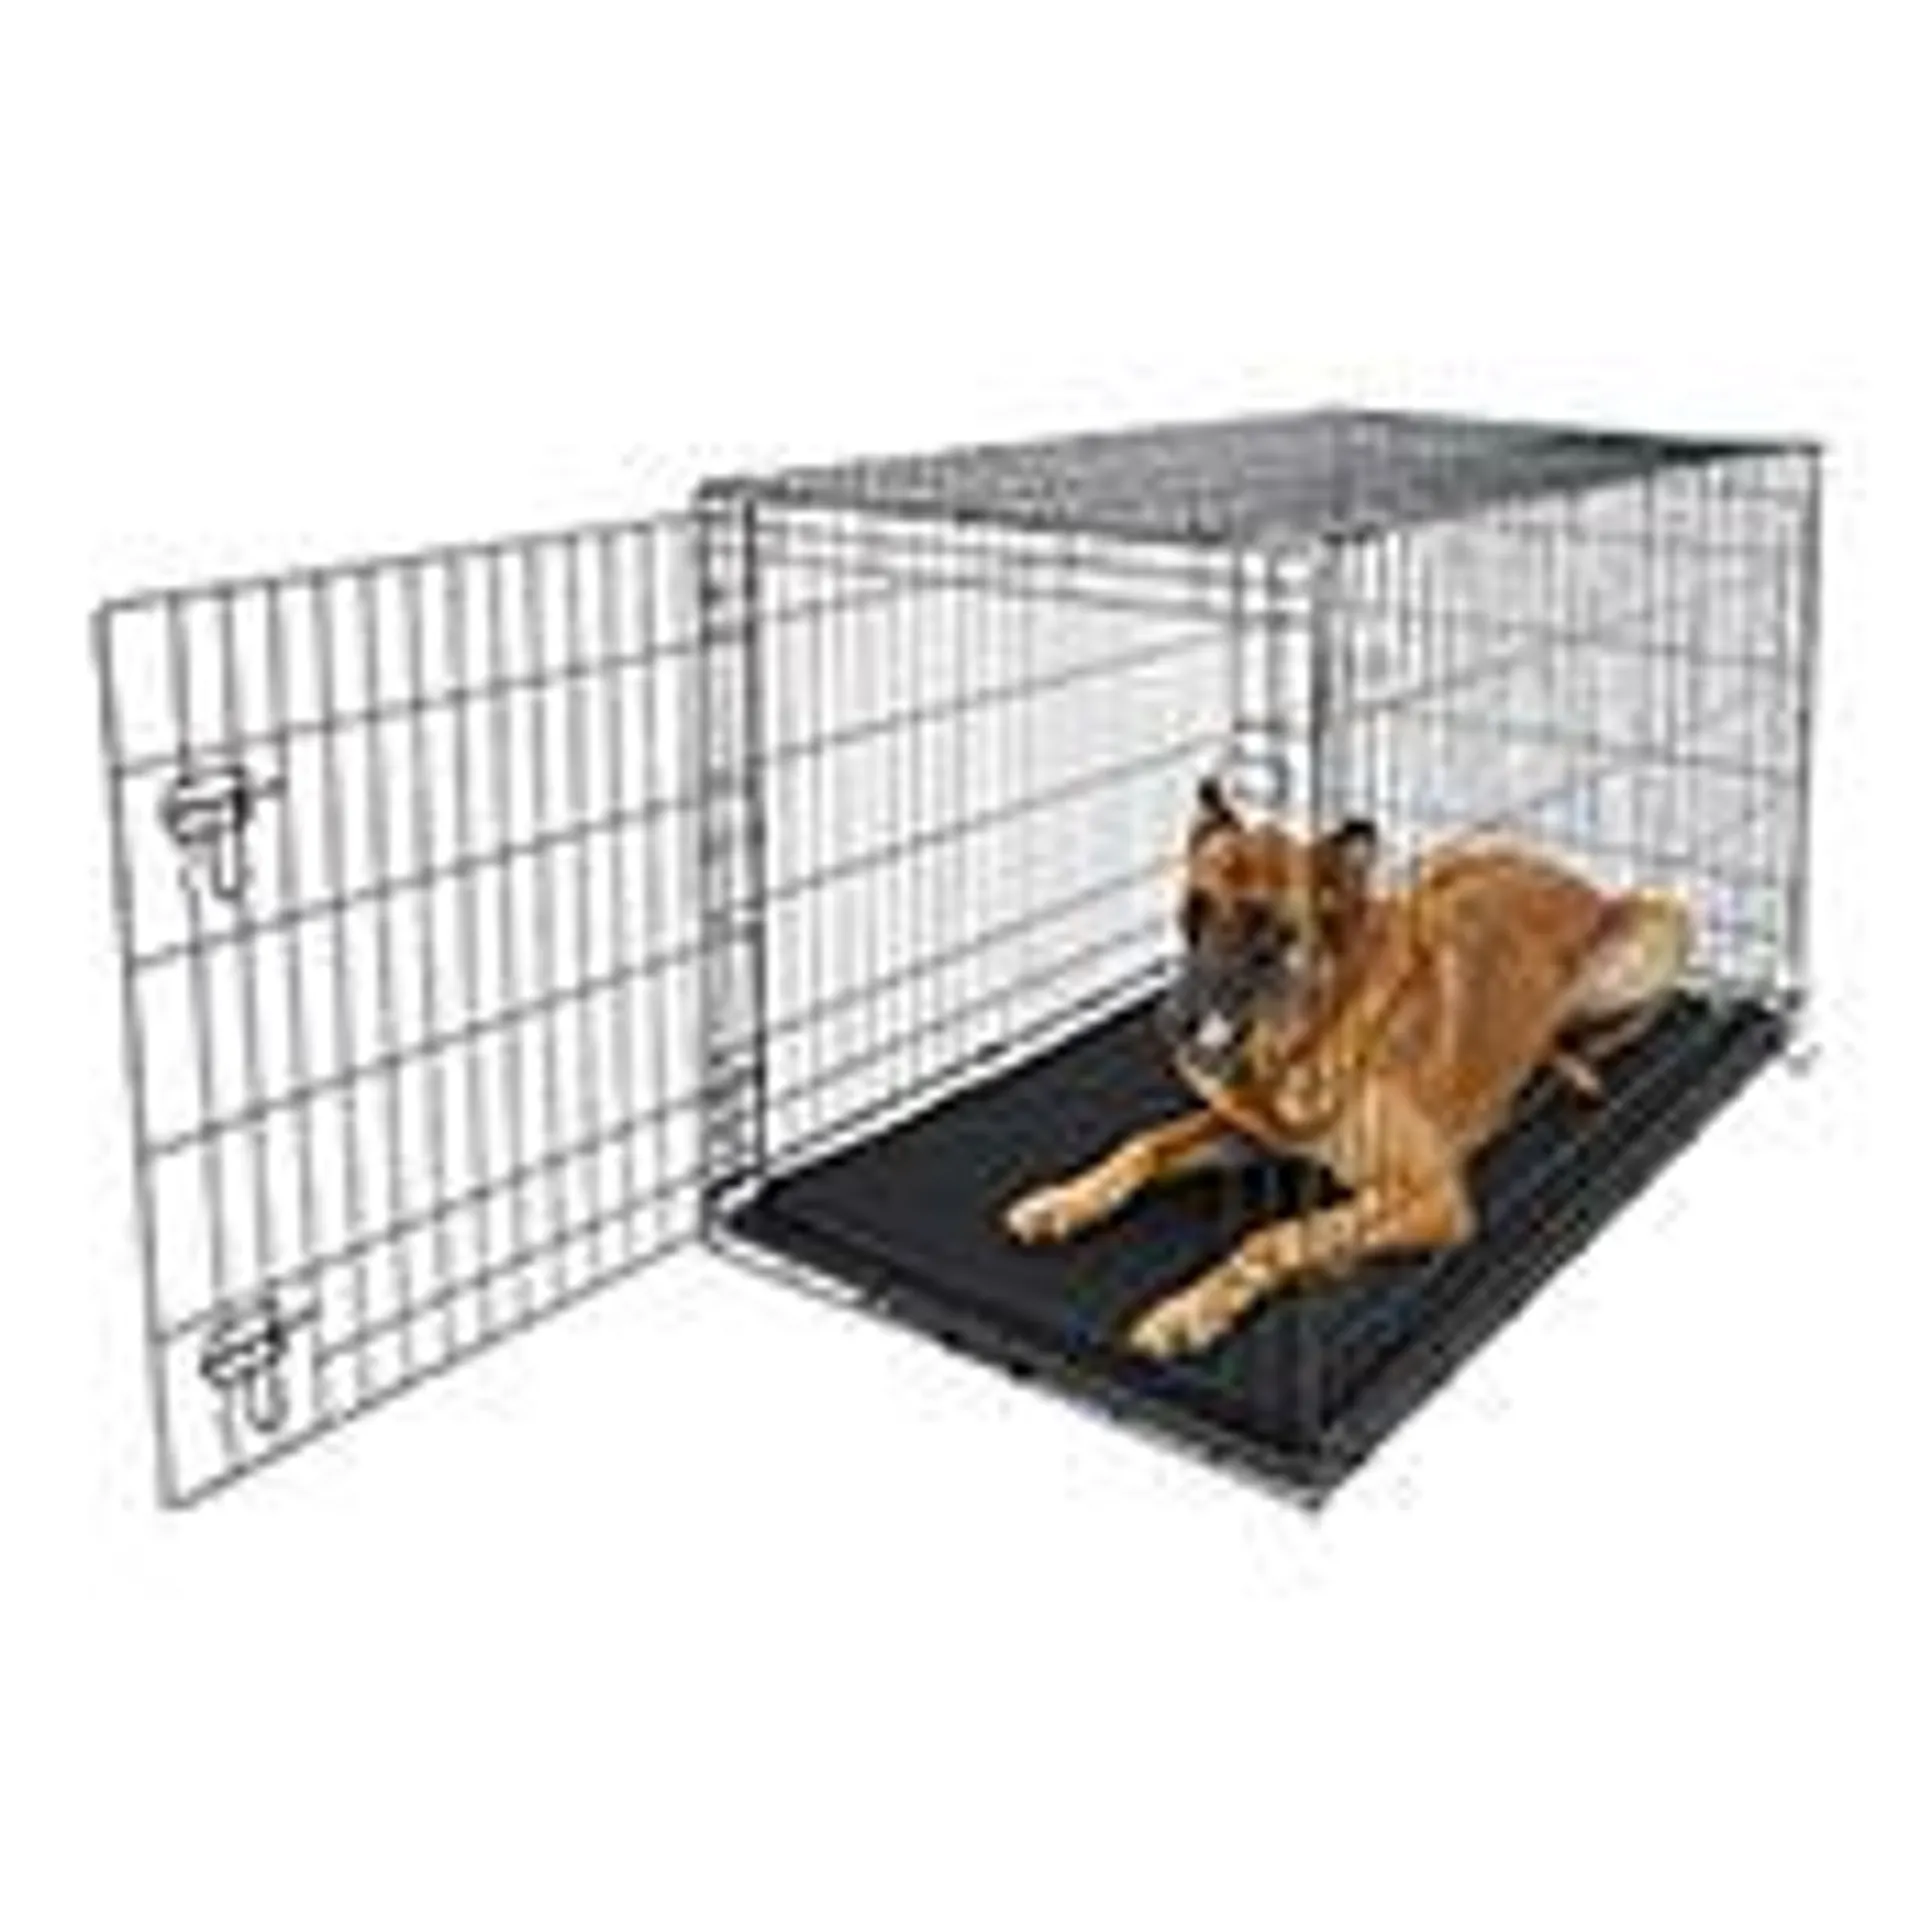 Pets at Home Single Door Dog Crate Black X Large